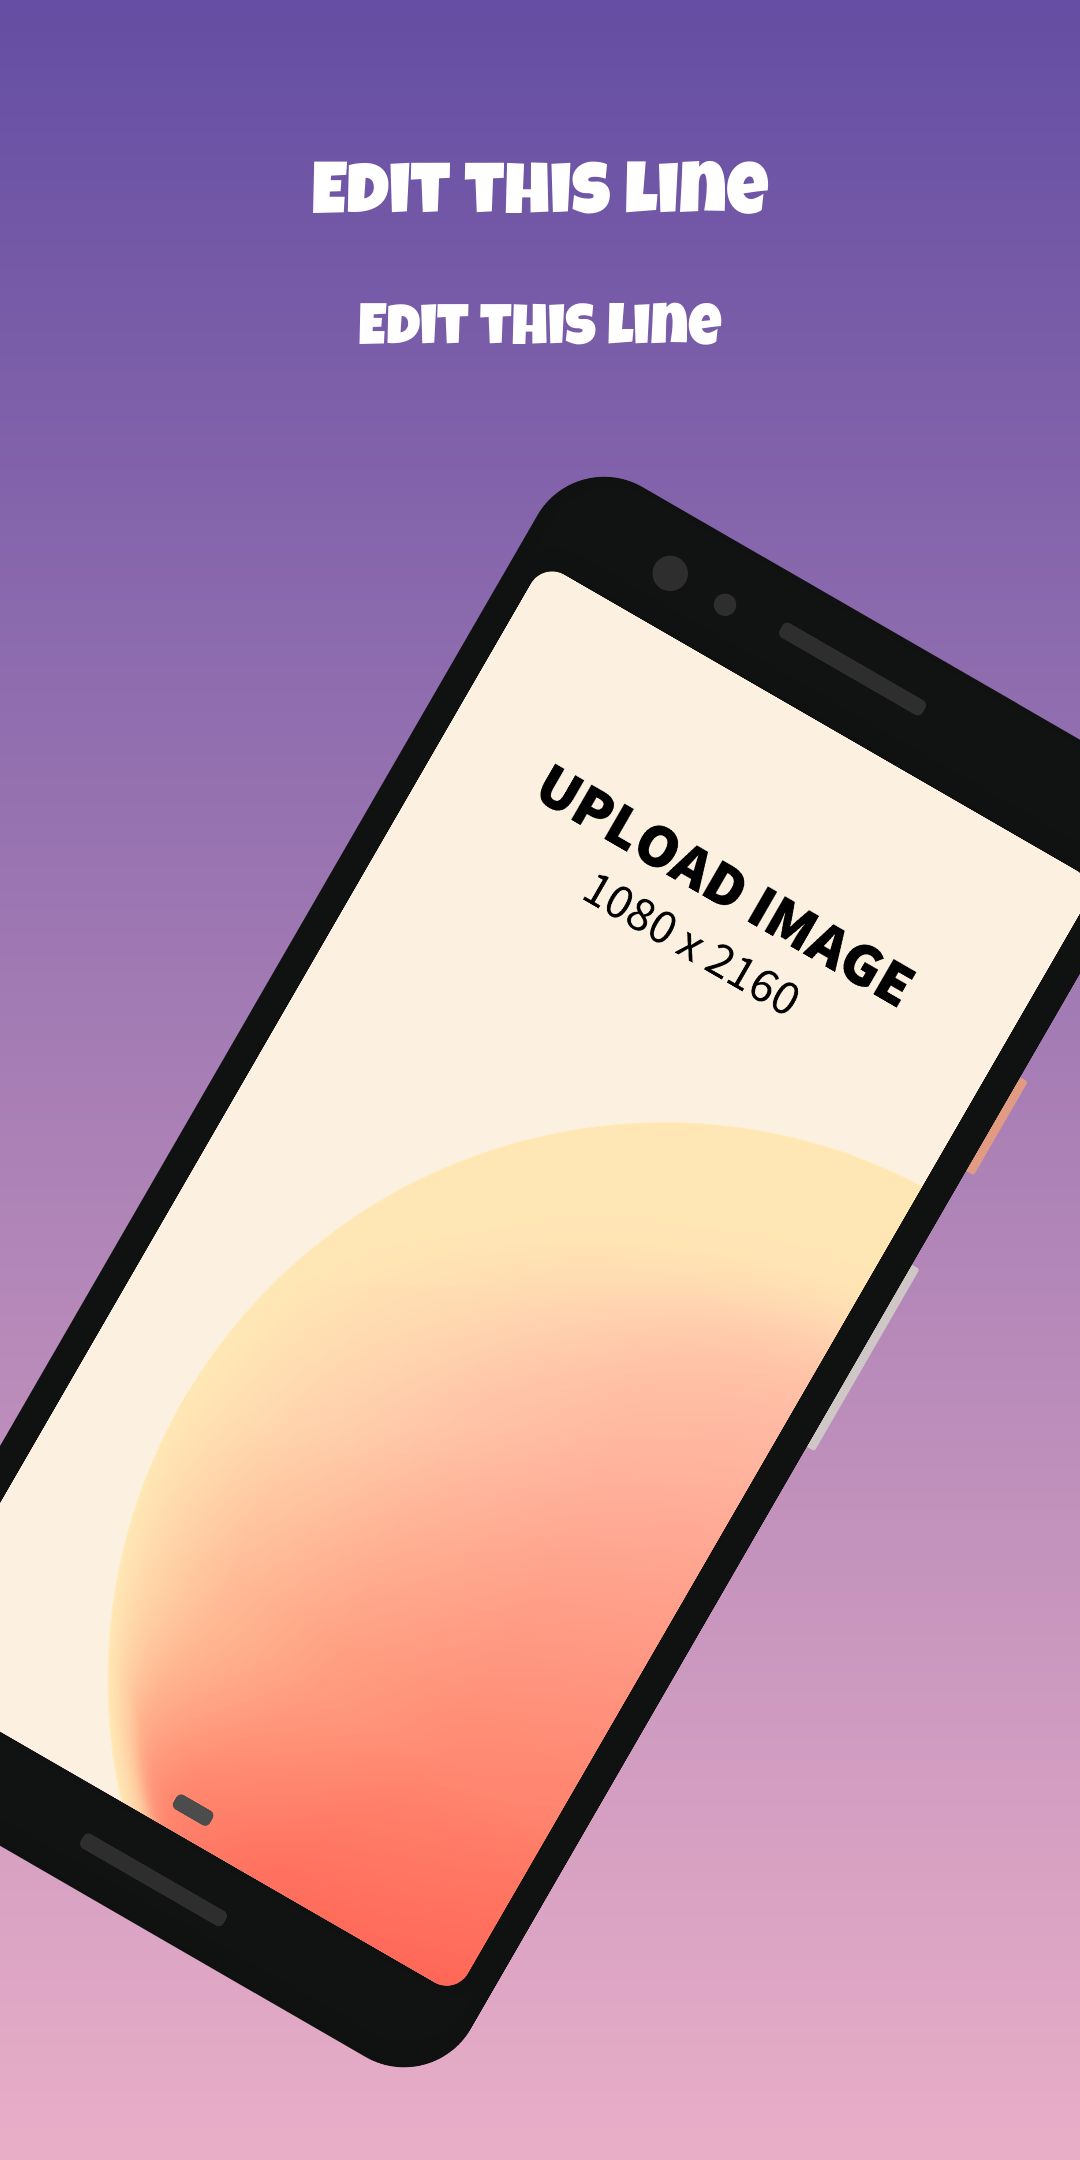 Google Pixel 3 Screenshot 4 template. Quickly edit text, colors, images, and more for free.